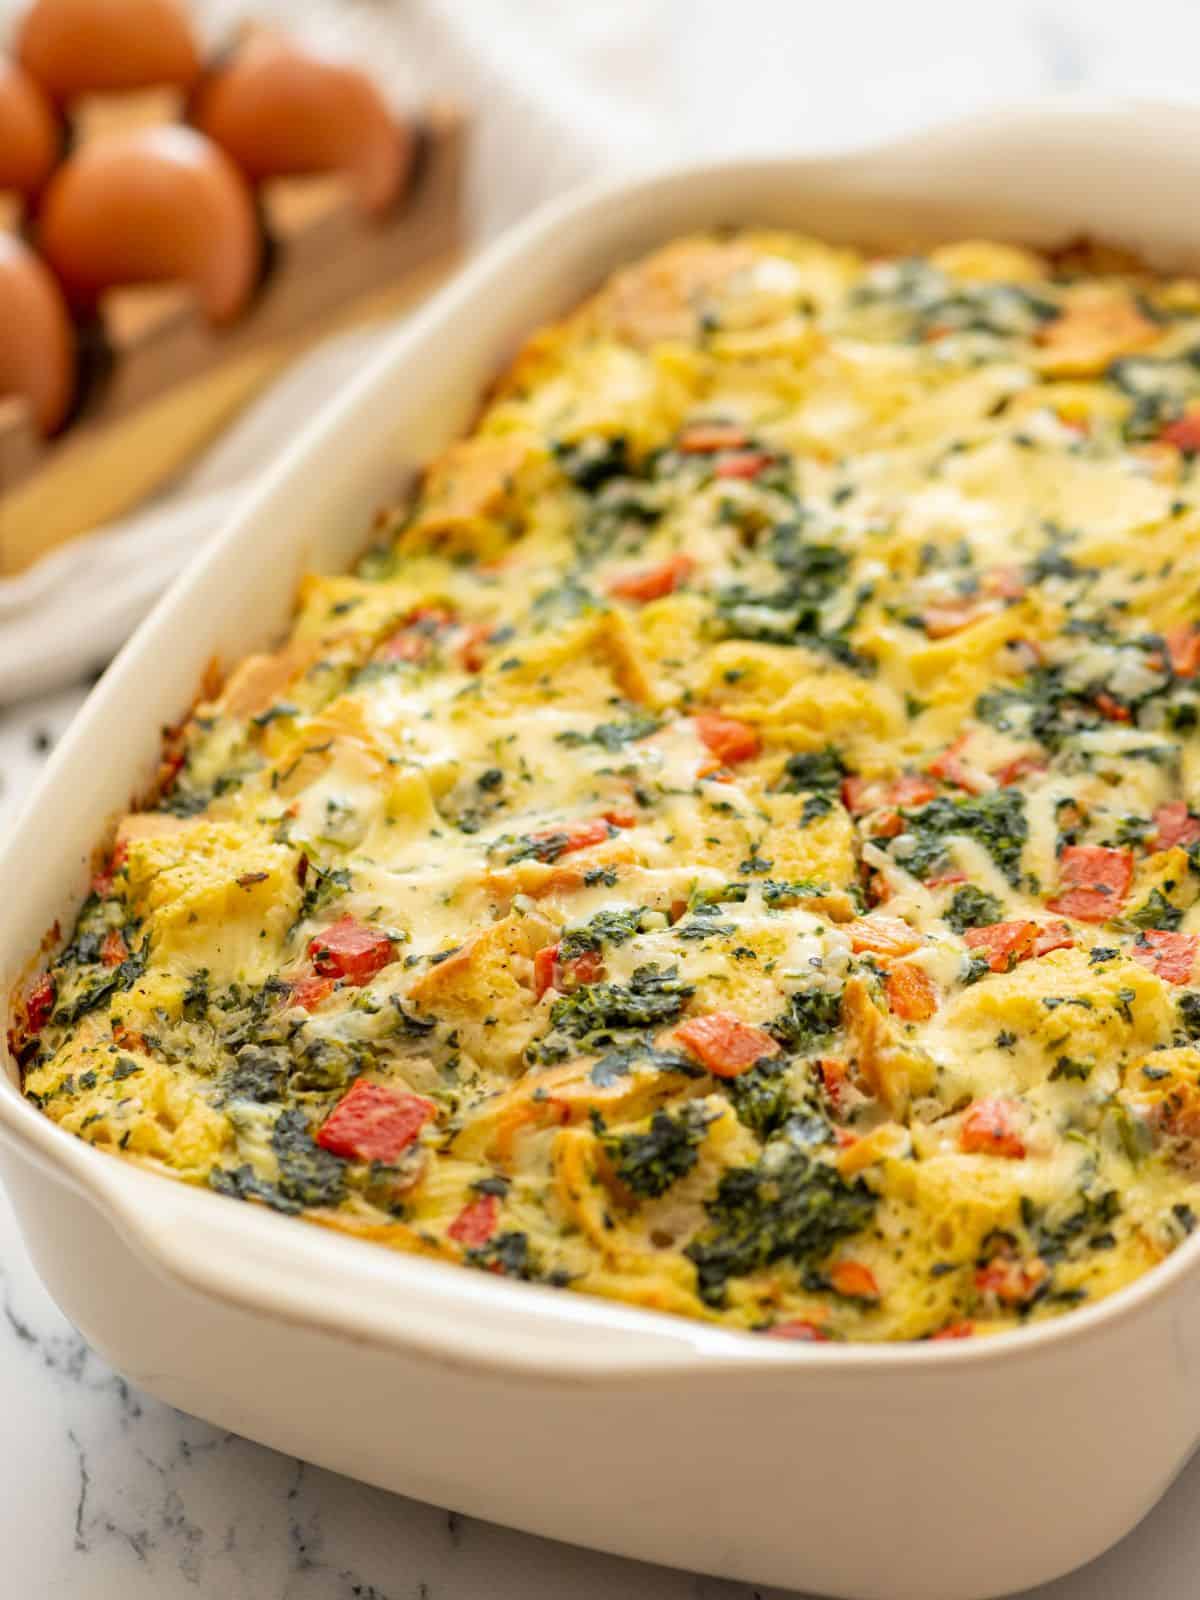 Baked breakfast strata with spinach and red peppers in baking dish.